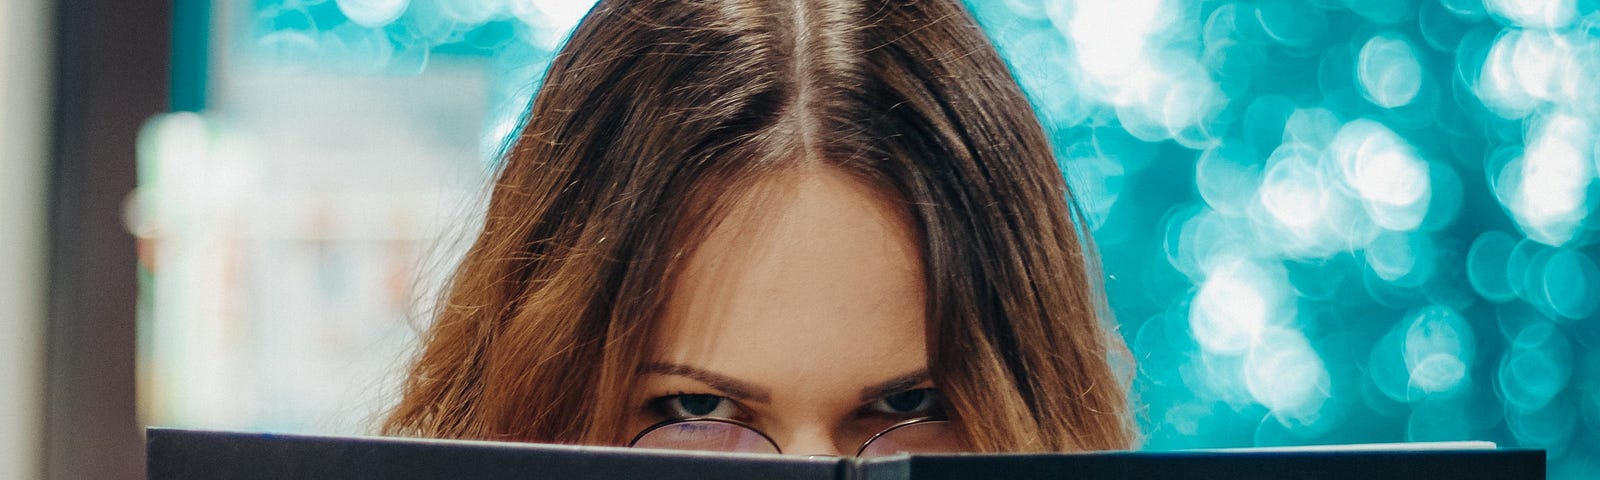 Woman looking annoyed, reading book titled, “ID.”